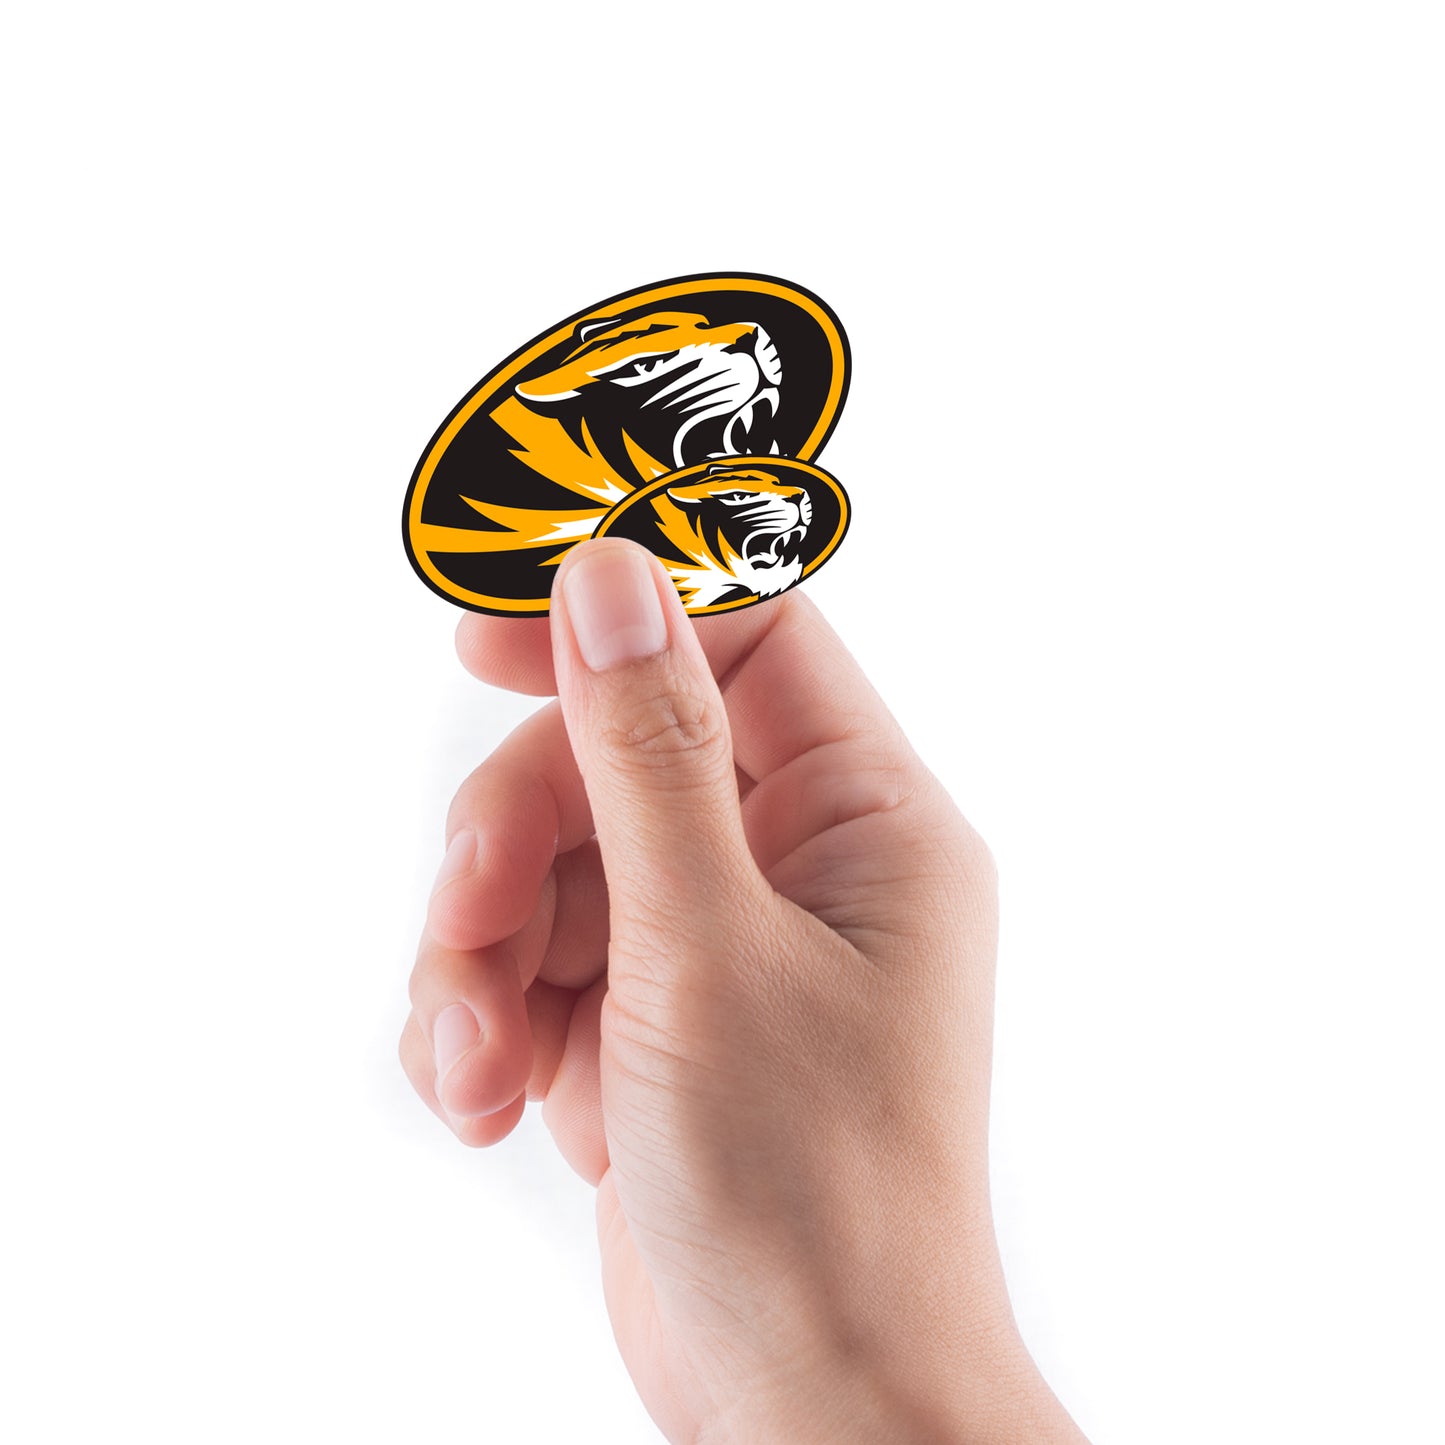 Sheet of 5 -U of Missouri: Missouri Tigers 2021 Logo Minis        - Officially Licensed NCAA Removable    Adhesive Decal